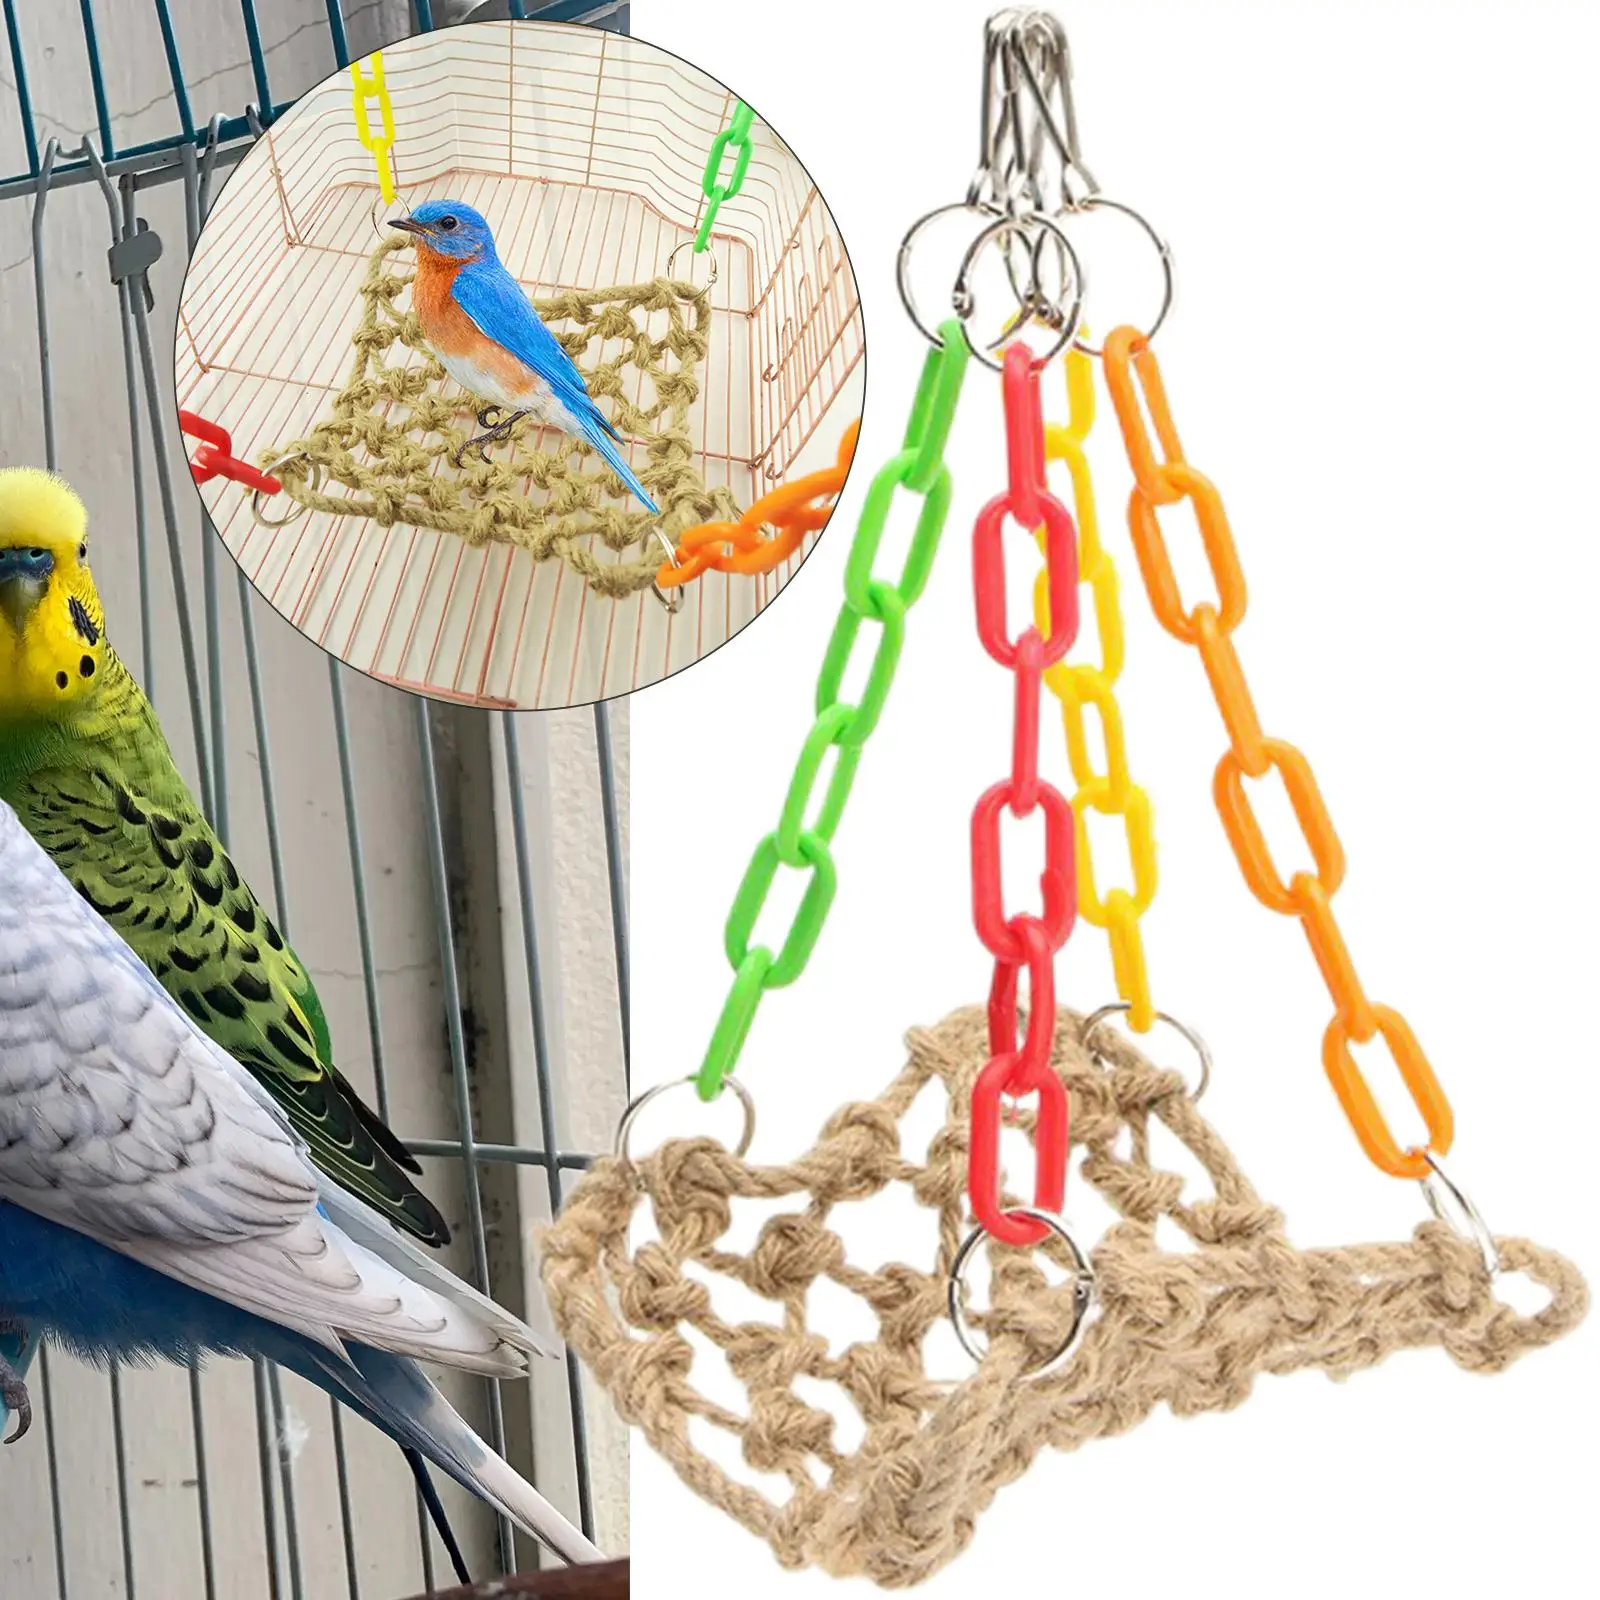 Pet Parrot Swing Toys Hanging Cage Toy Cage Toy Hammock Perches Stands for Finches Love Birds Parrot Small Bird Pet Supplies